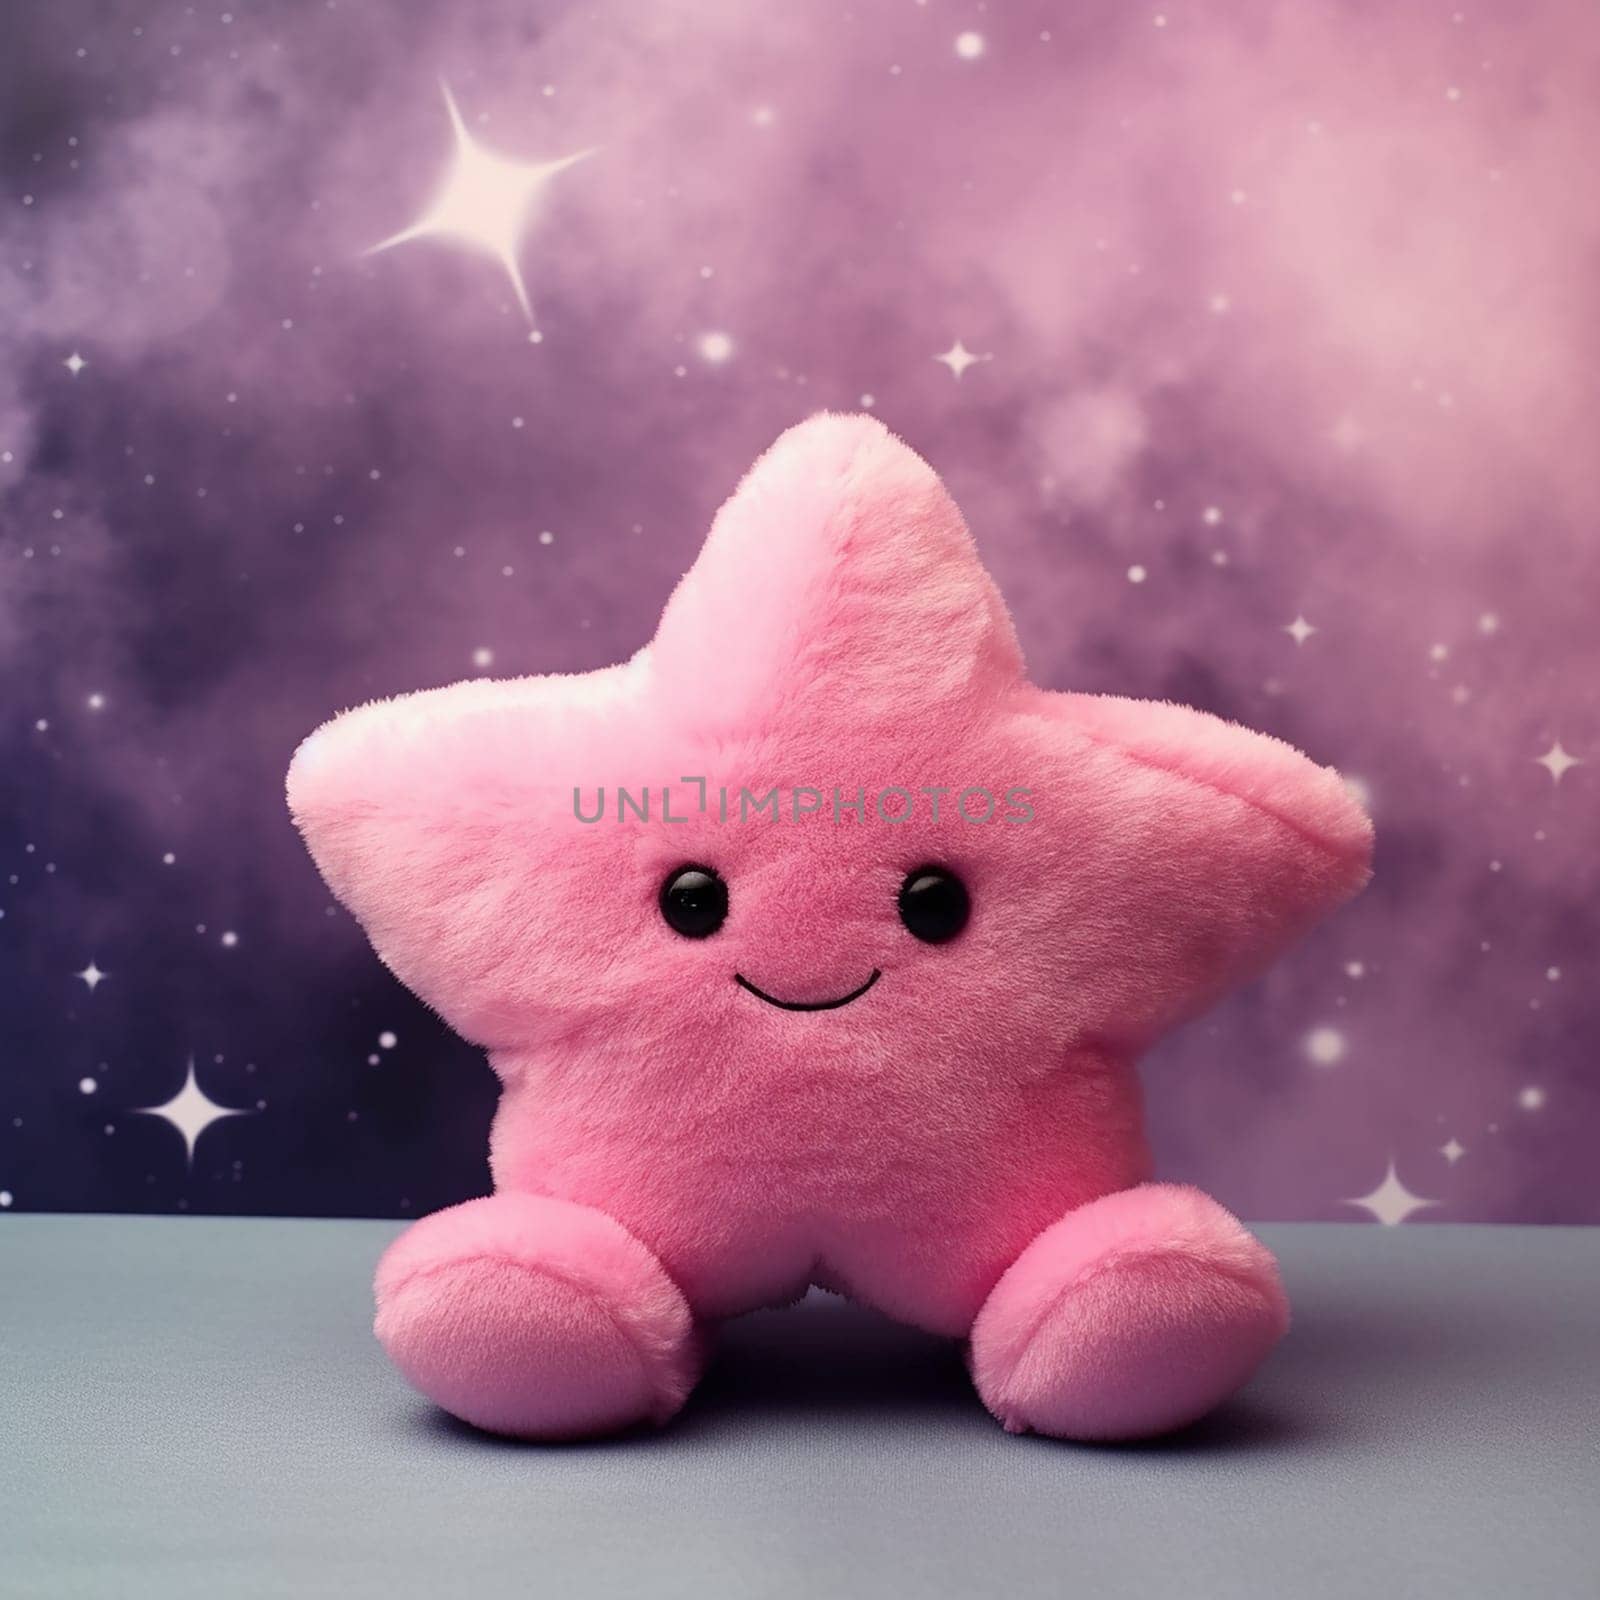 Cute pink plush star with a smile against a starry background